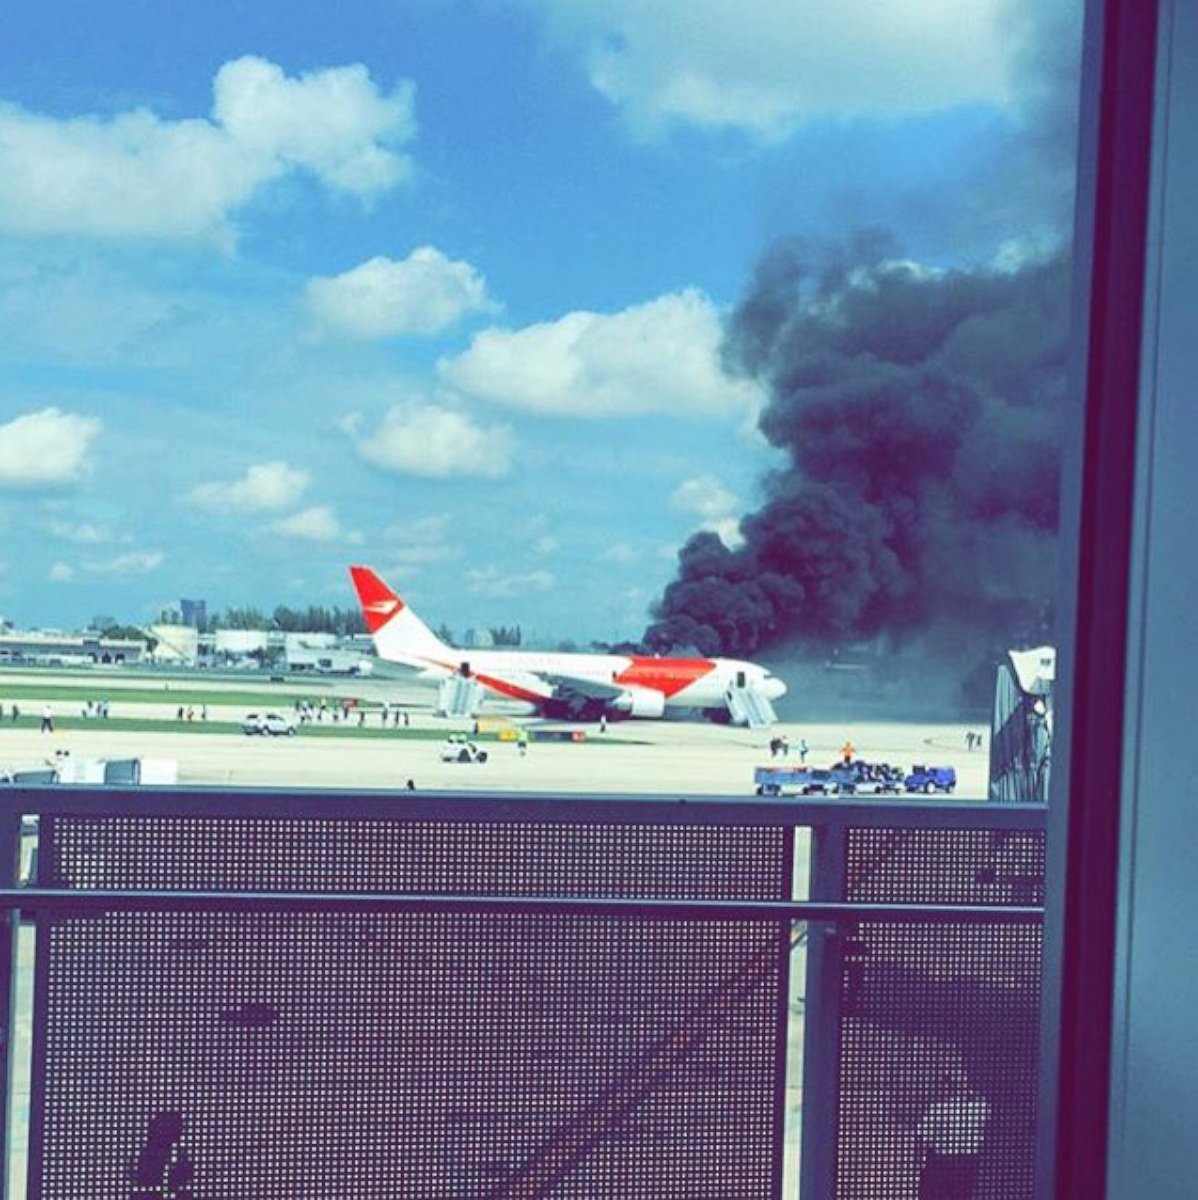 PHOTO: A Dynamic International Airways plane burns on the tarmac at Ft. Lauderdale-Hollywood International Airport on Oct. 29, 2015.